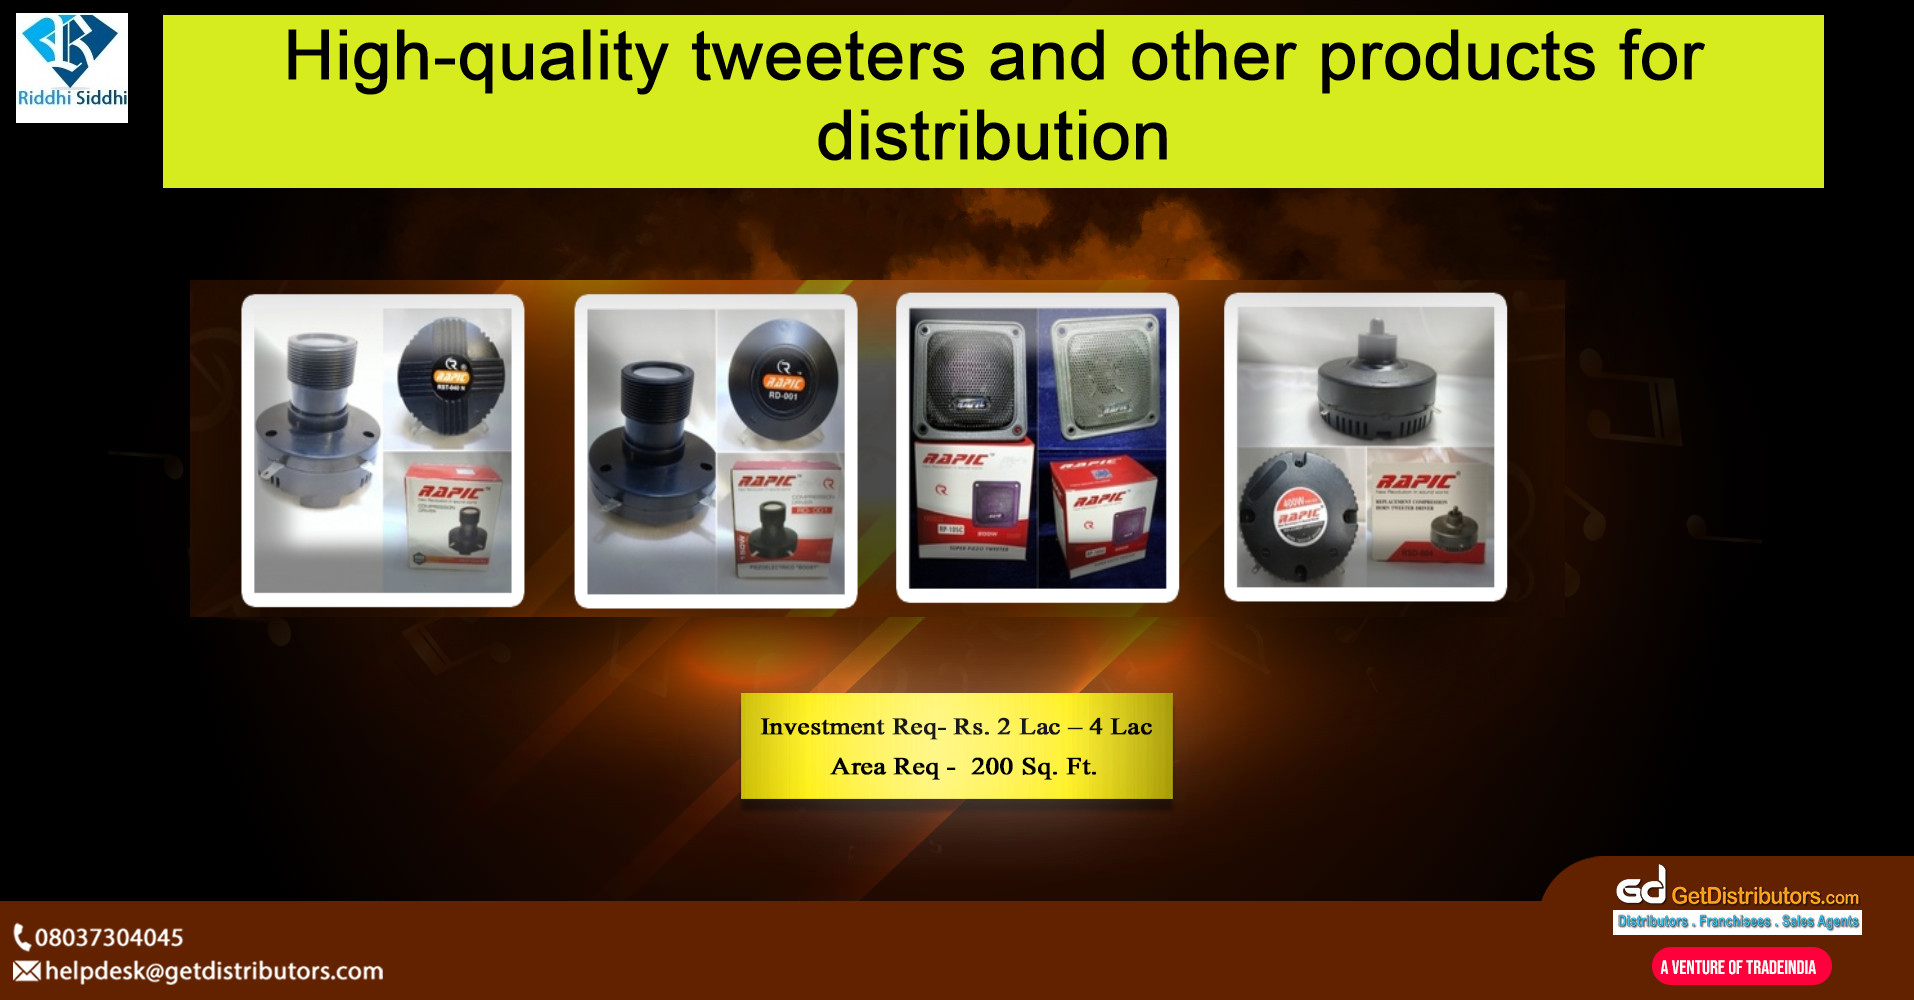 High-quality tweeters and other products for distribution